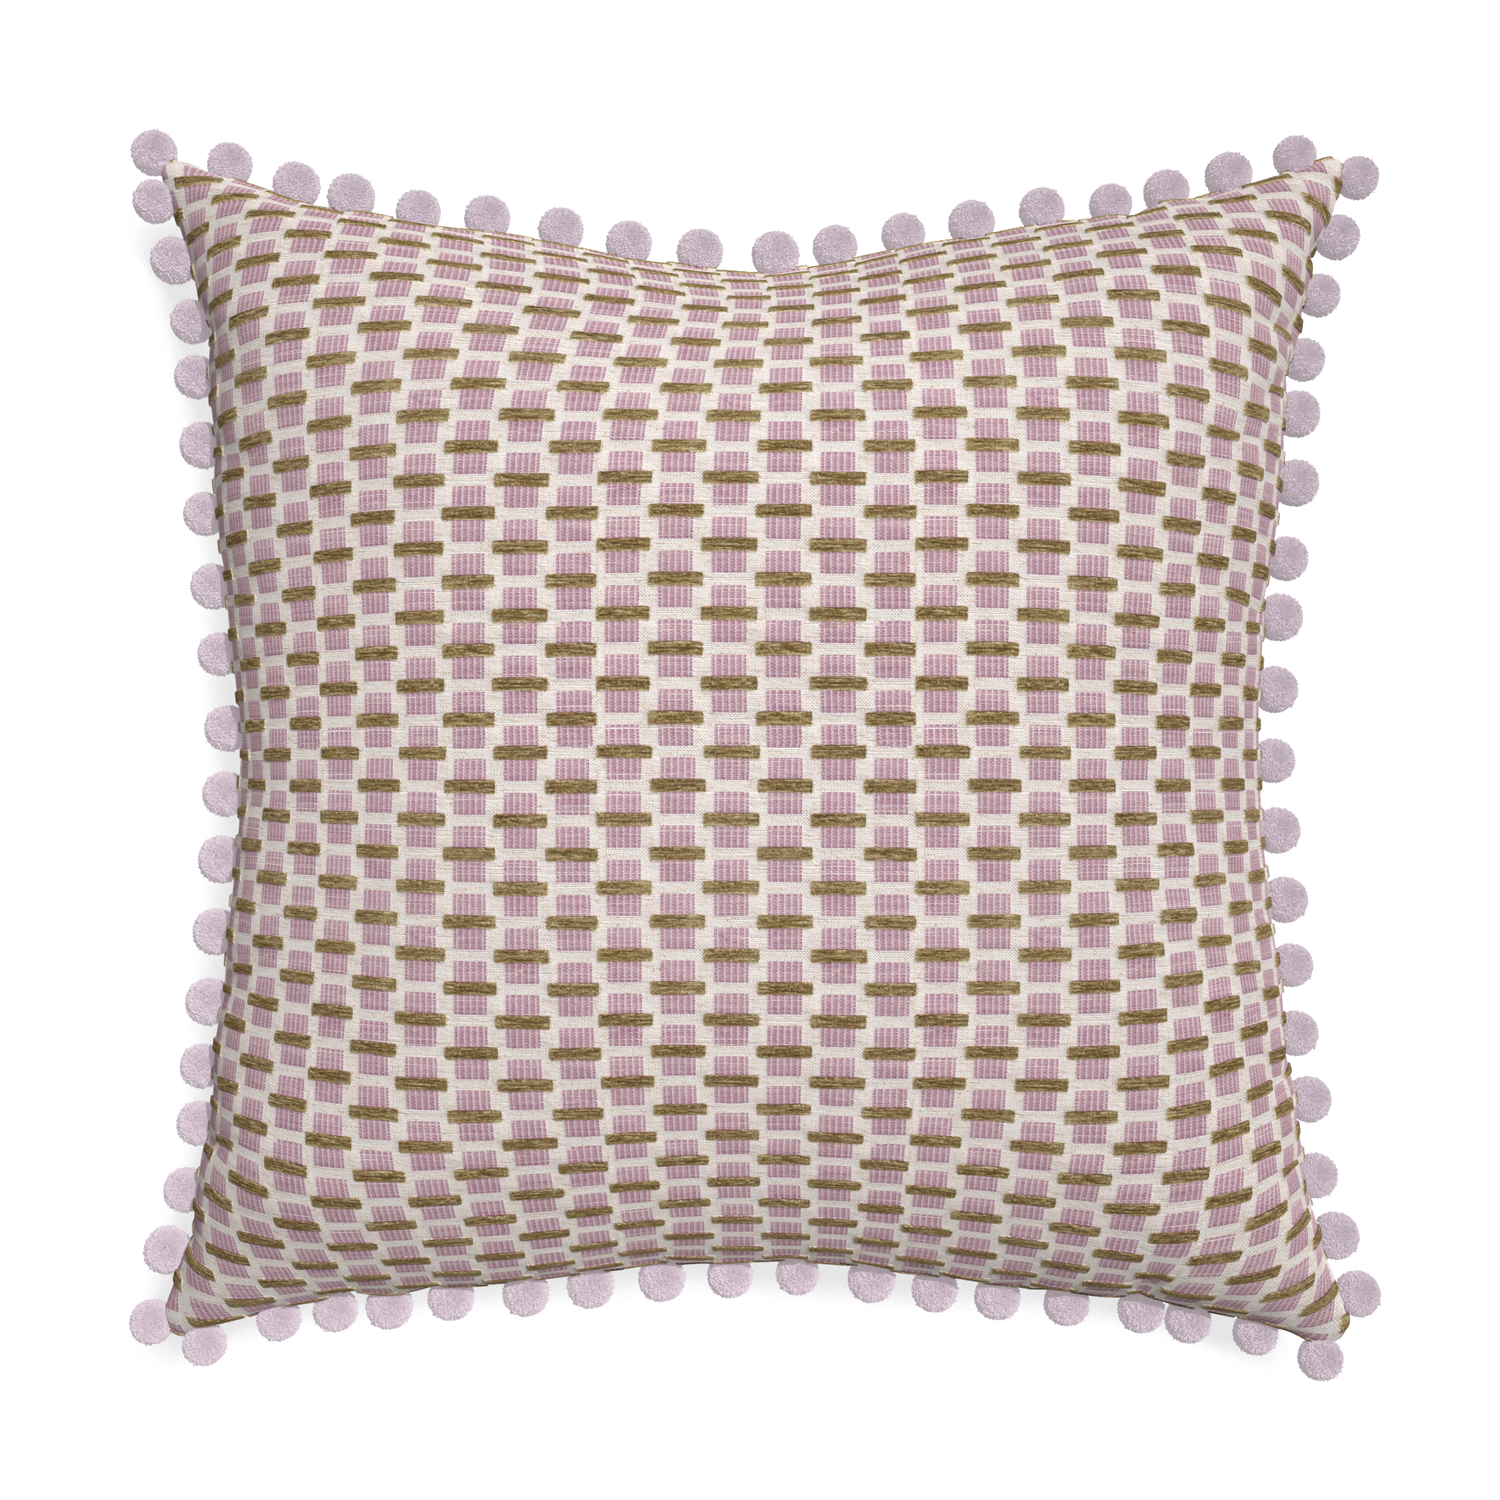 Euro-sham willow orchid custom pink geometric chenillepillow with l on white background